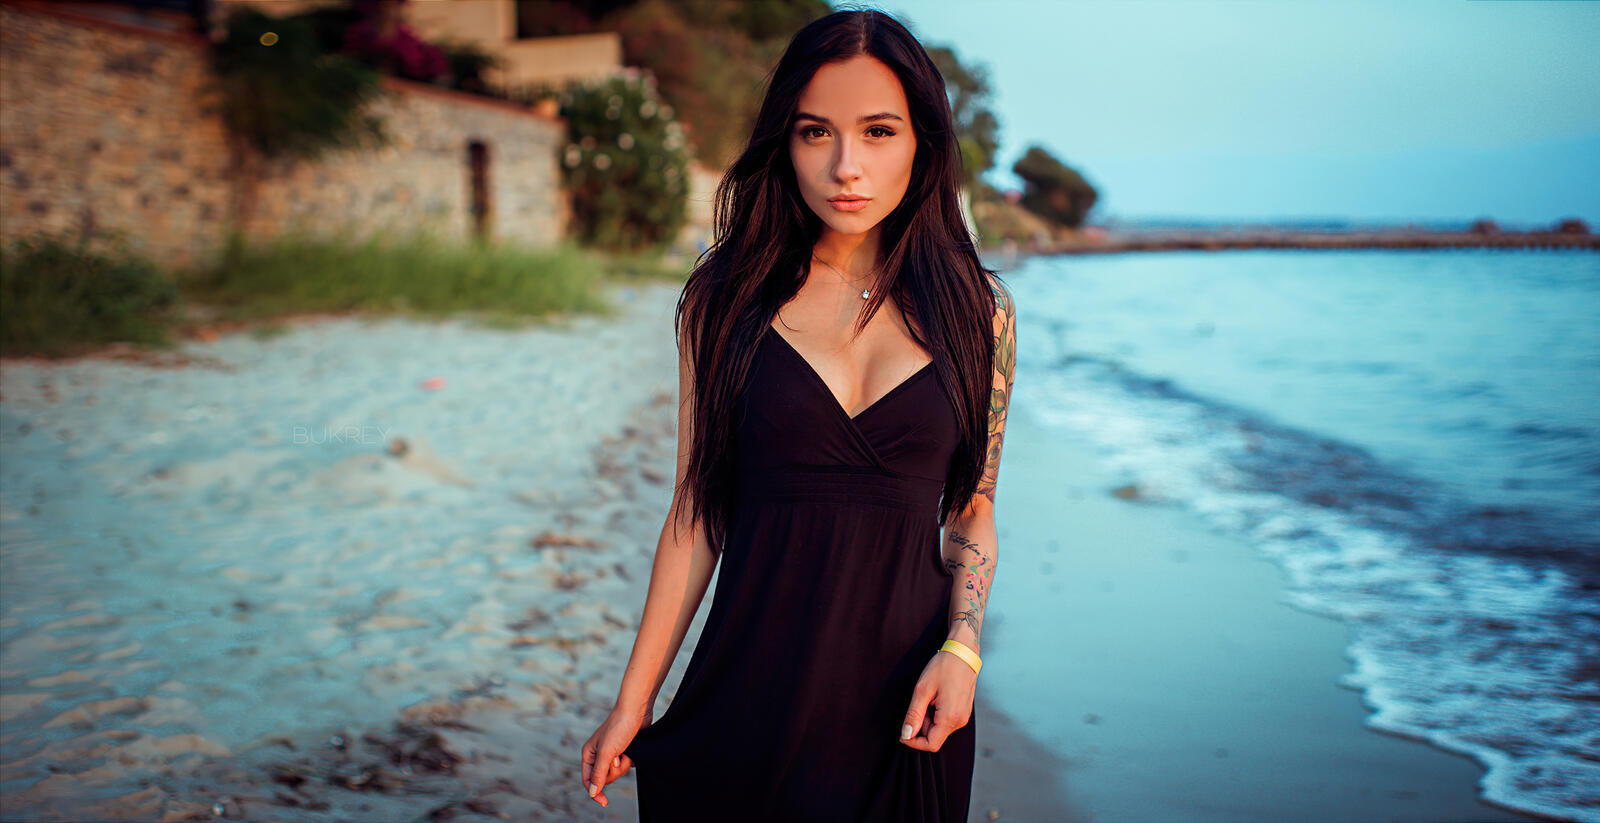 Free photo Charming brunette in a black evening gown walking along the beach